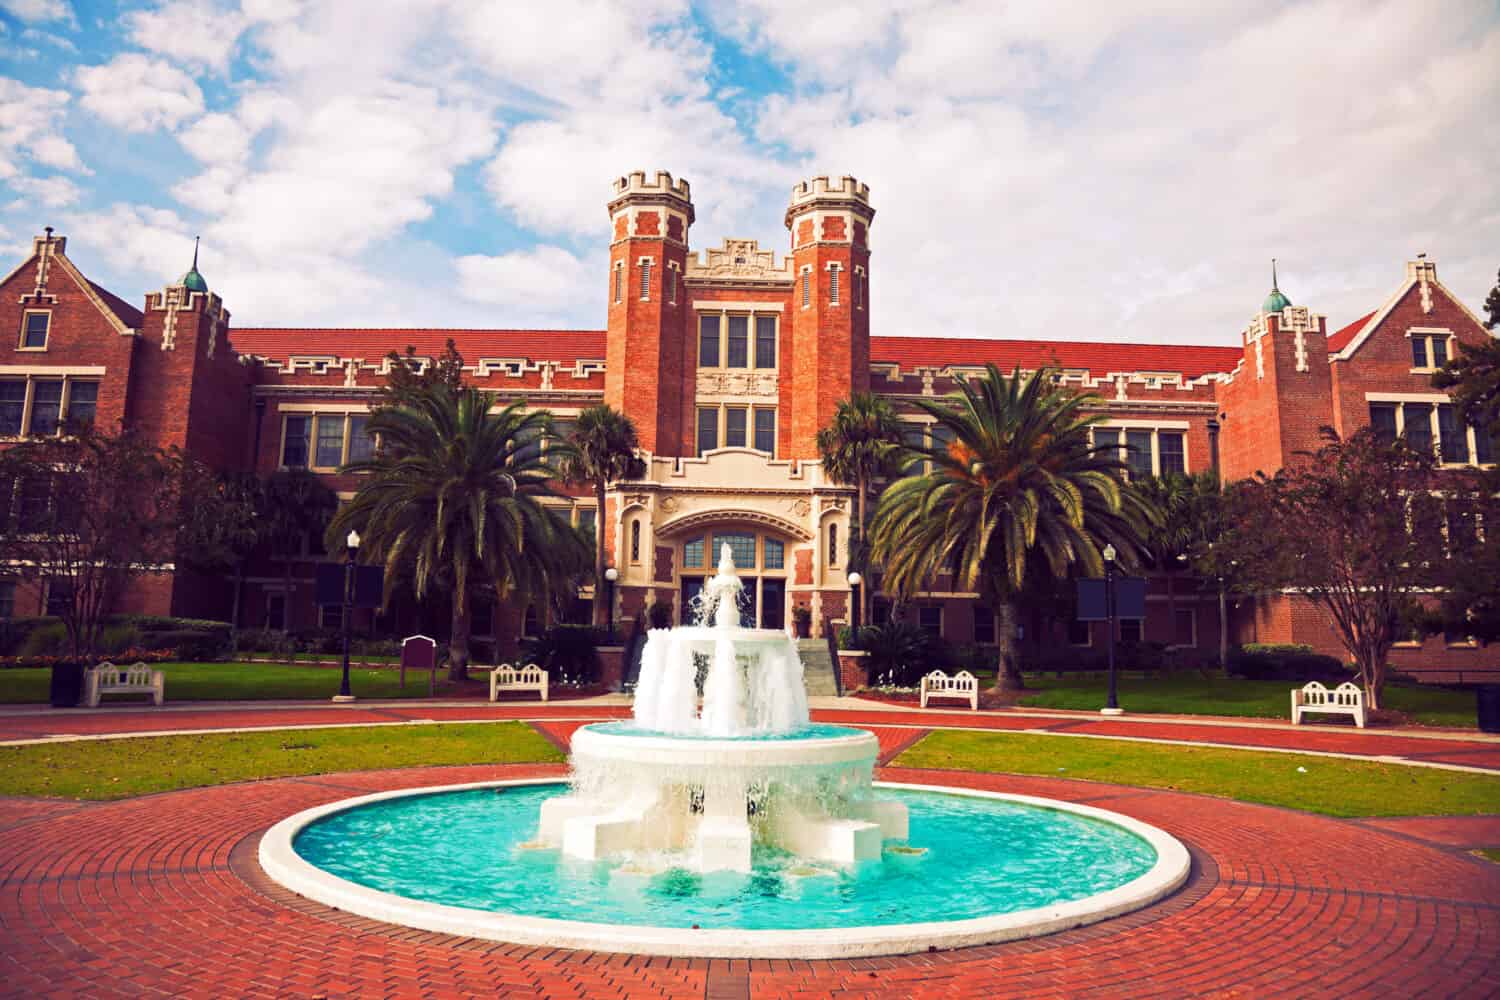 Florida State University historic buildings in Tallahassee, Florida